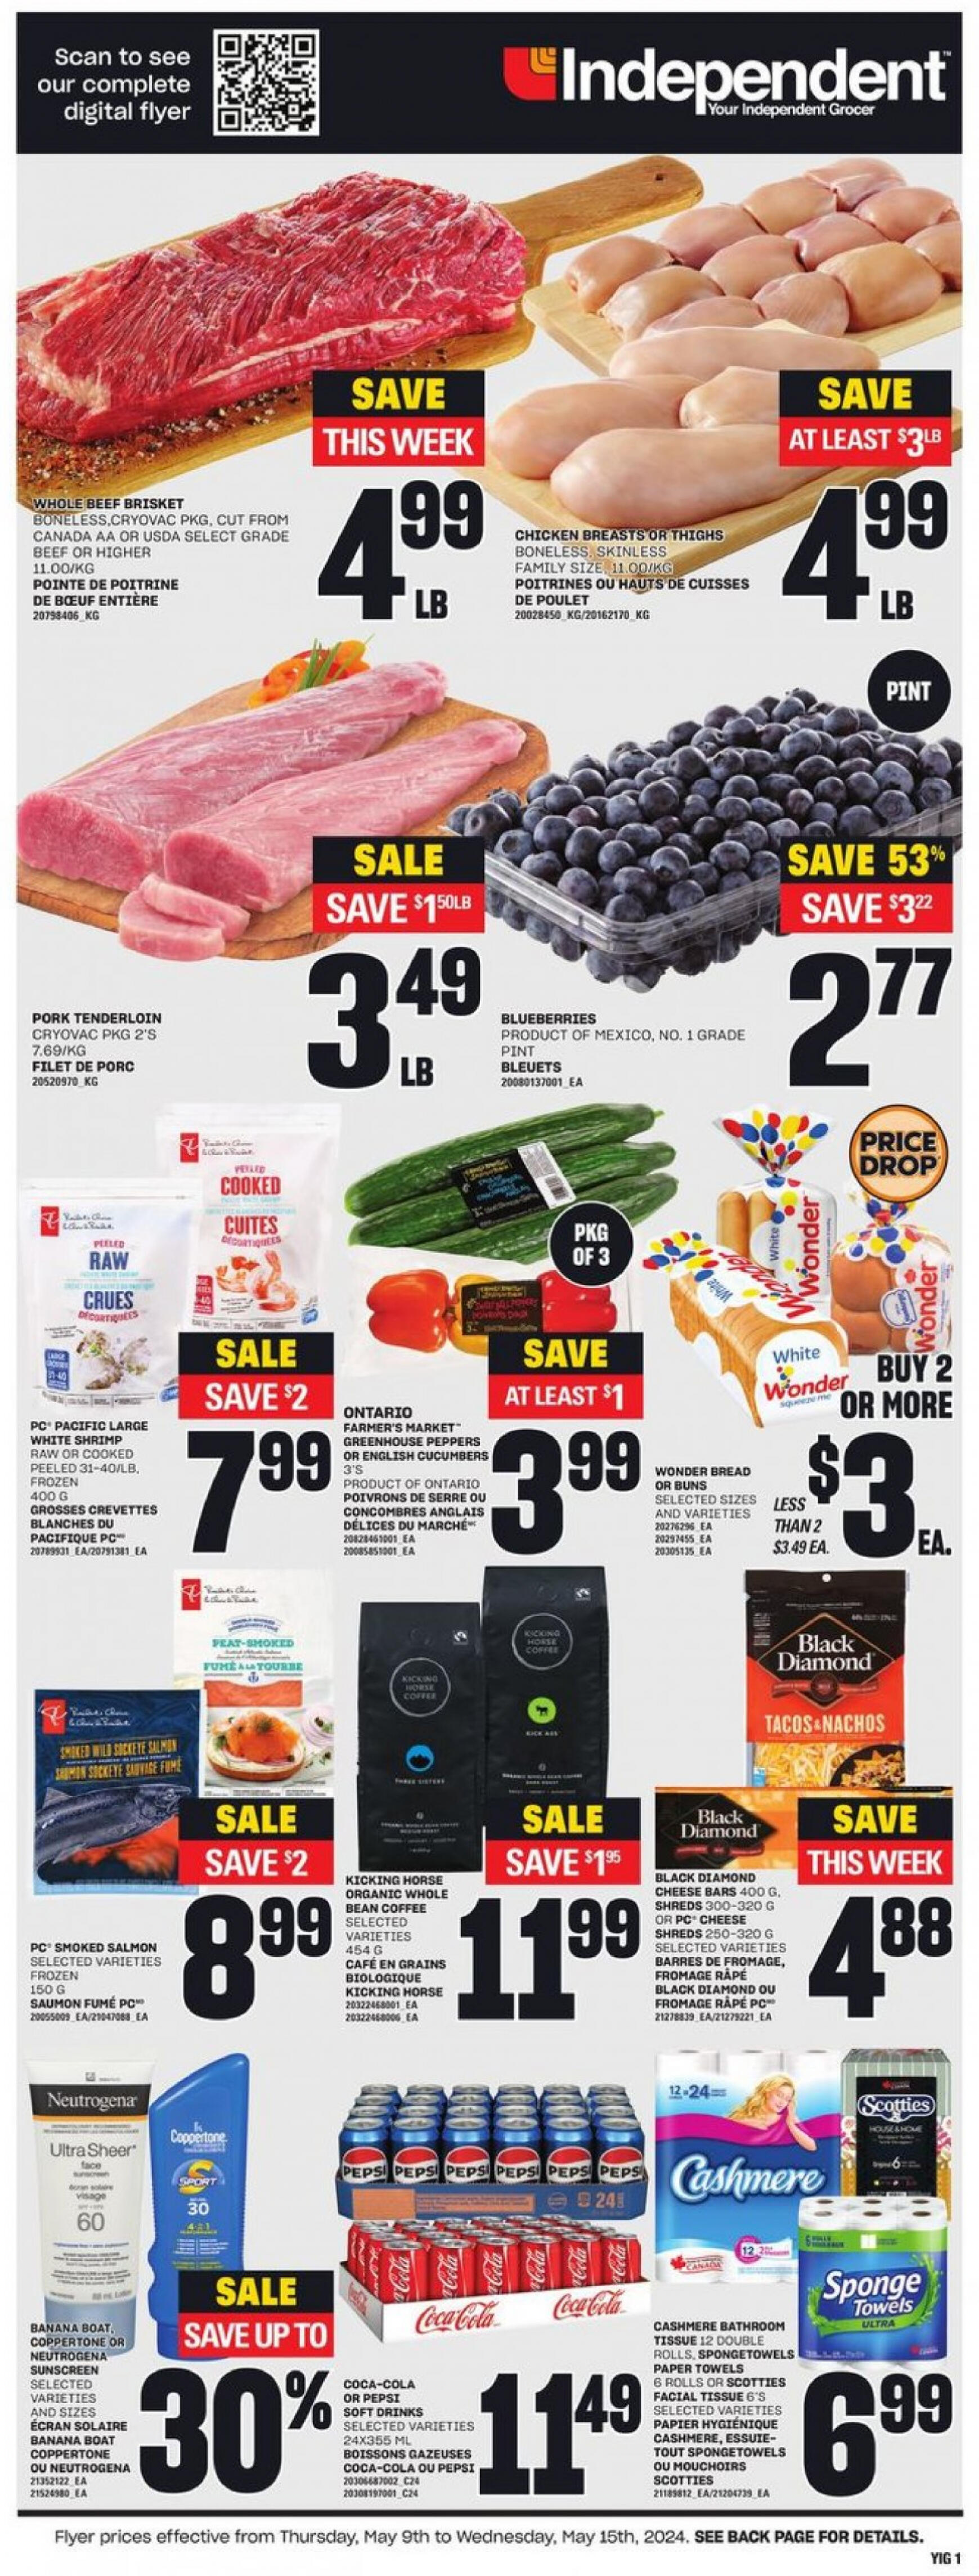 independent-grocery - Independent Grocery flyer current 09.05. - 15.05. - page: 5